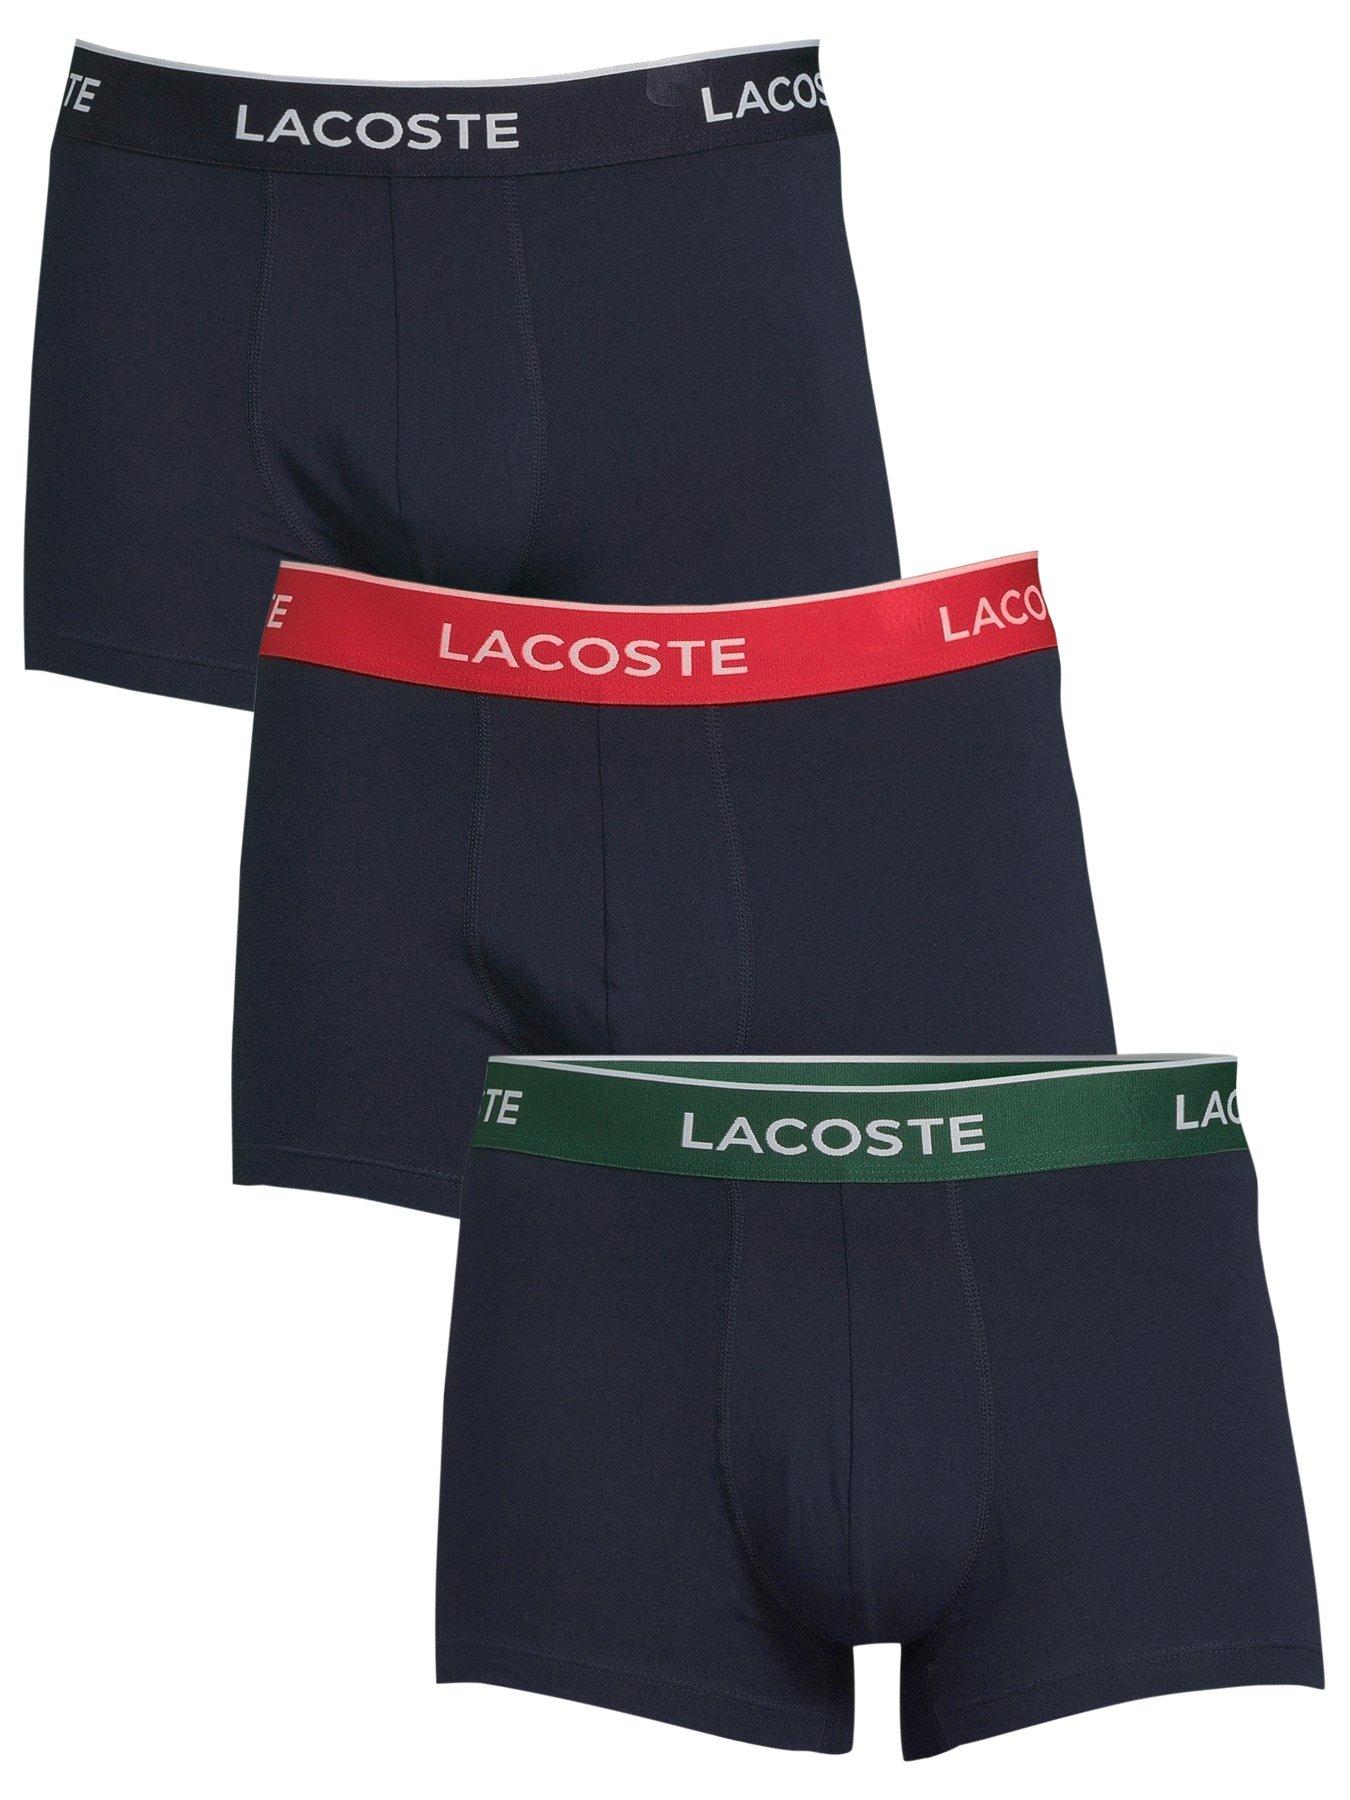 Lacoste Casual Assorted Trunks 3-Pack